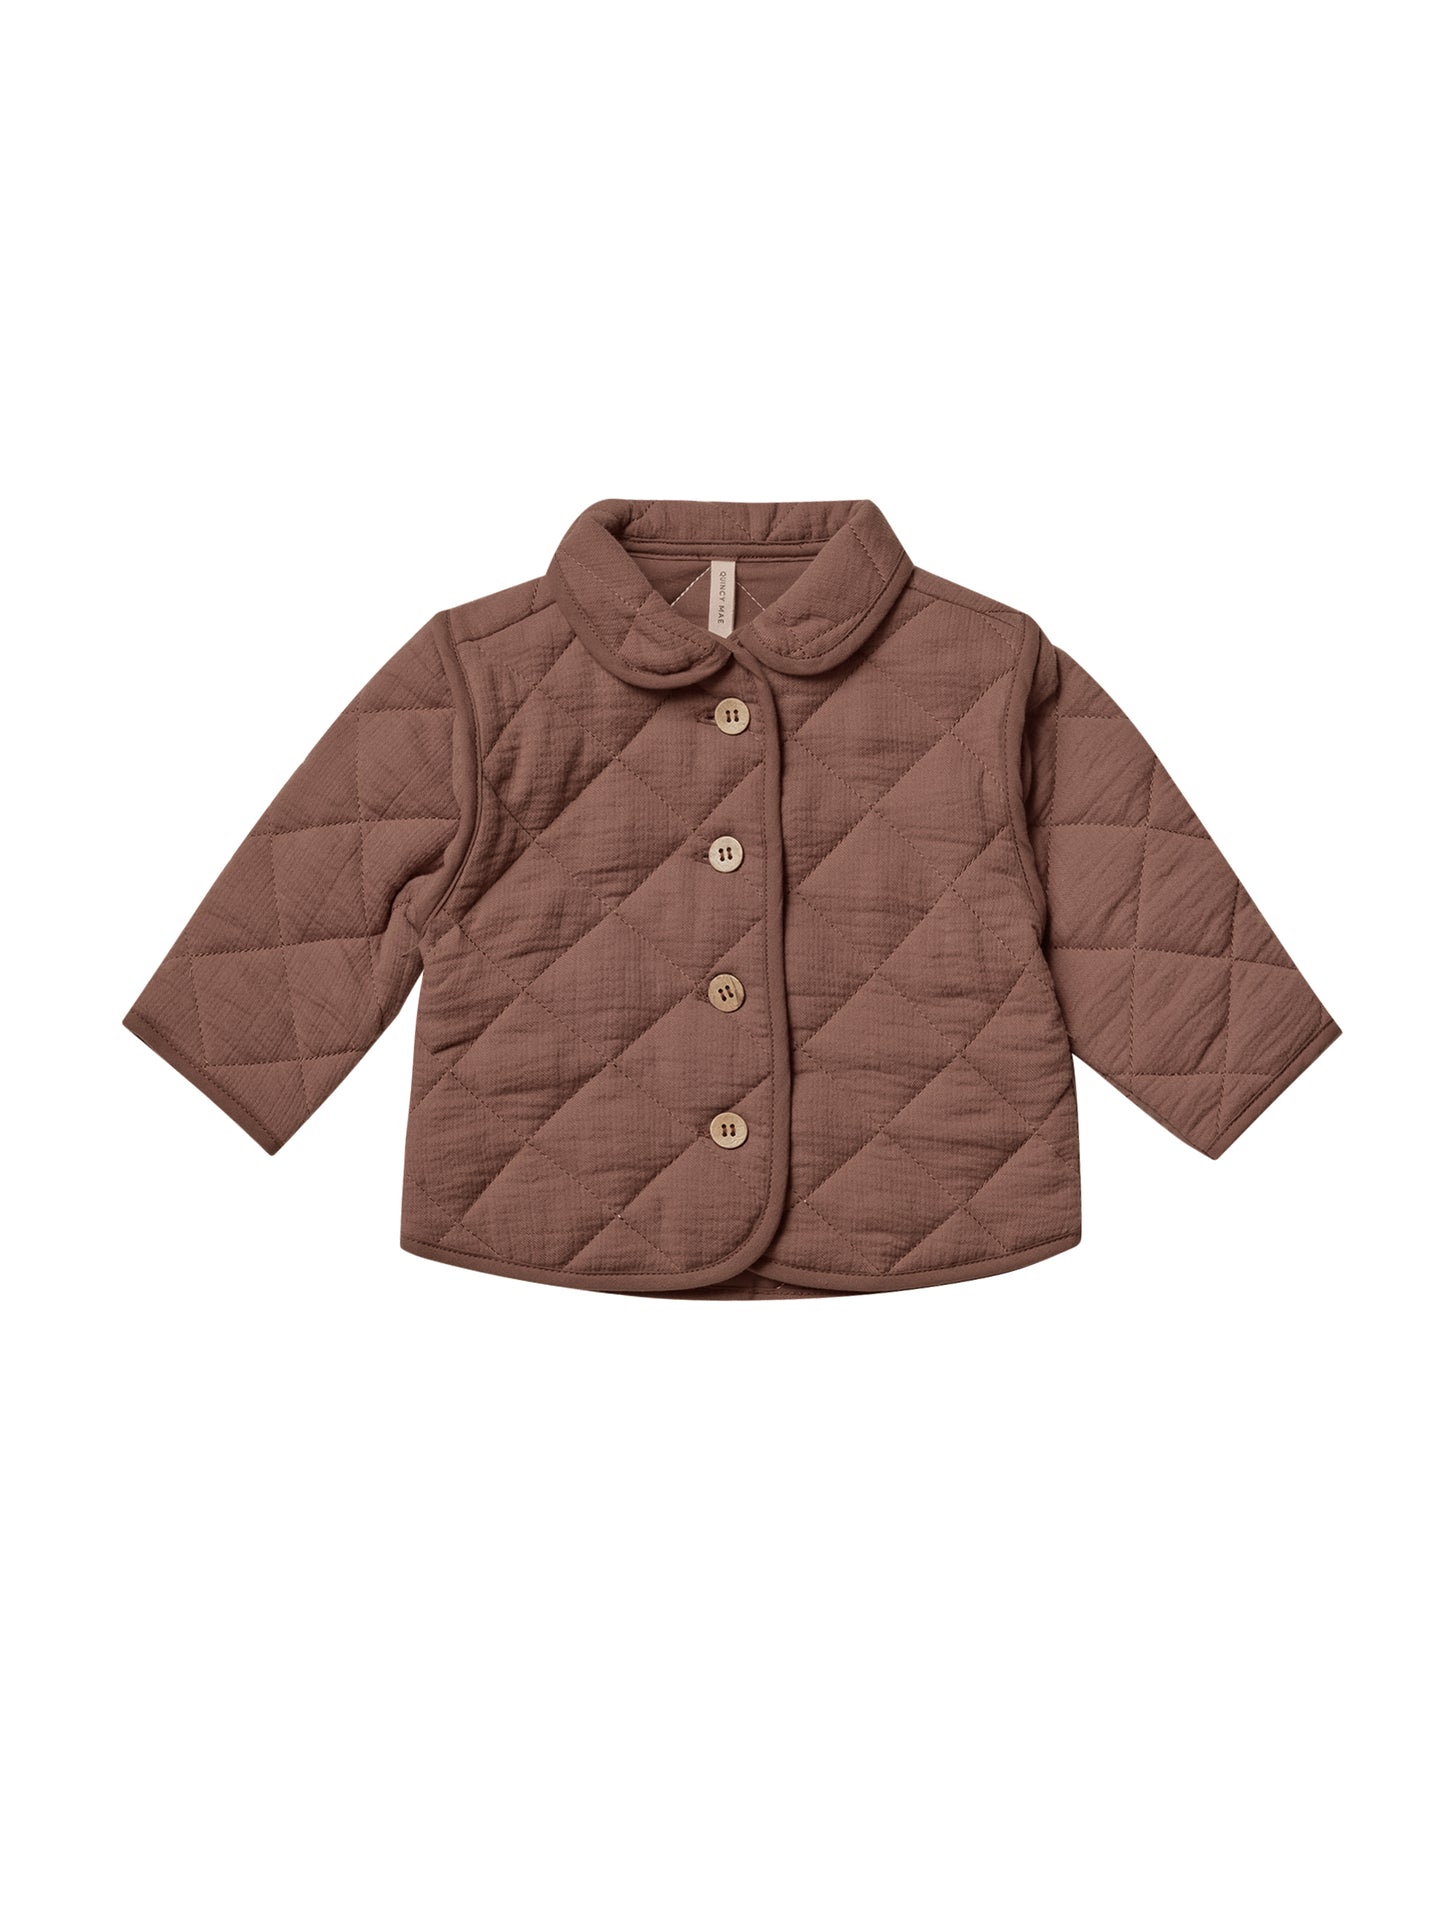 quilted jacket quincy mae pecan unisex